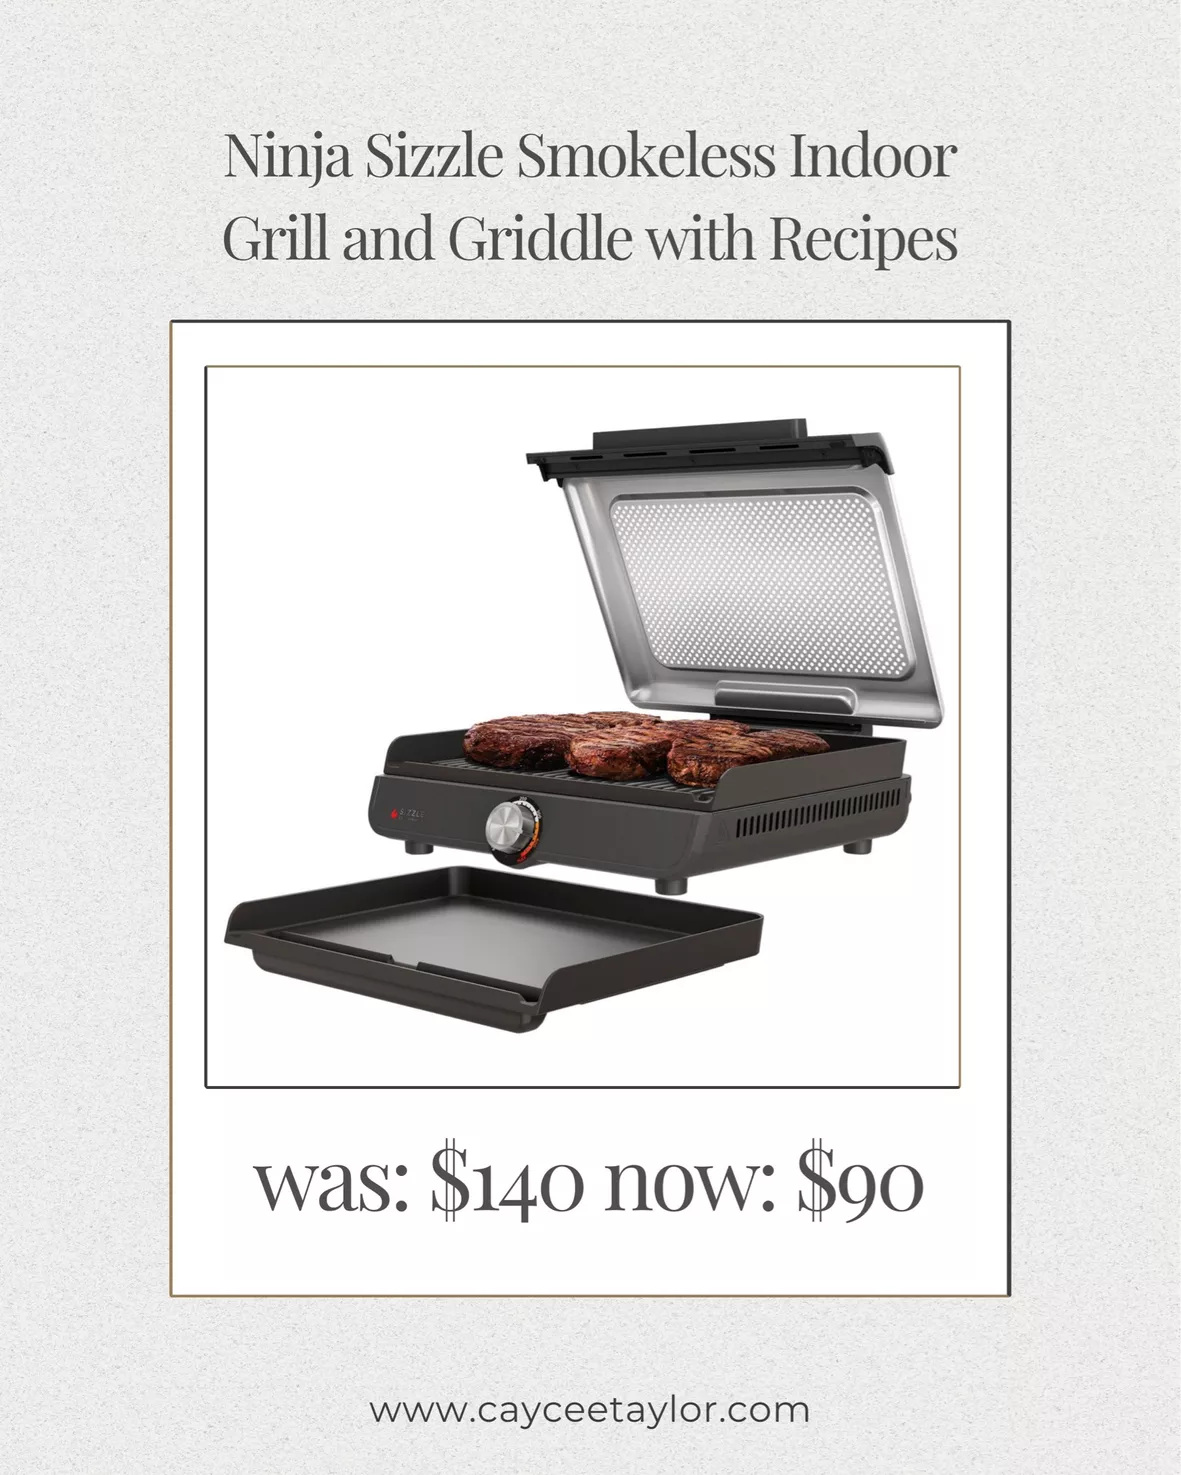 New! Ninja Sizzle Smikeless Indoor Grill & griddle makes awesome